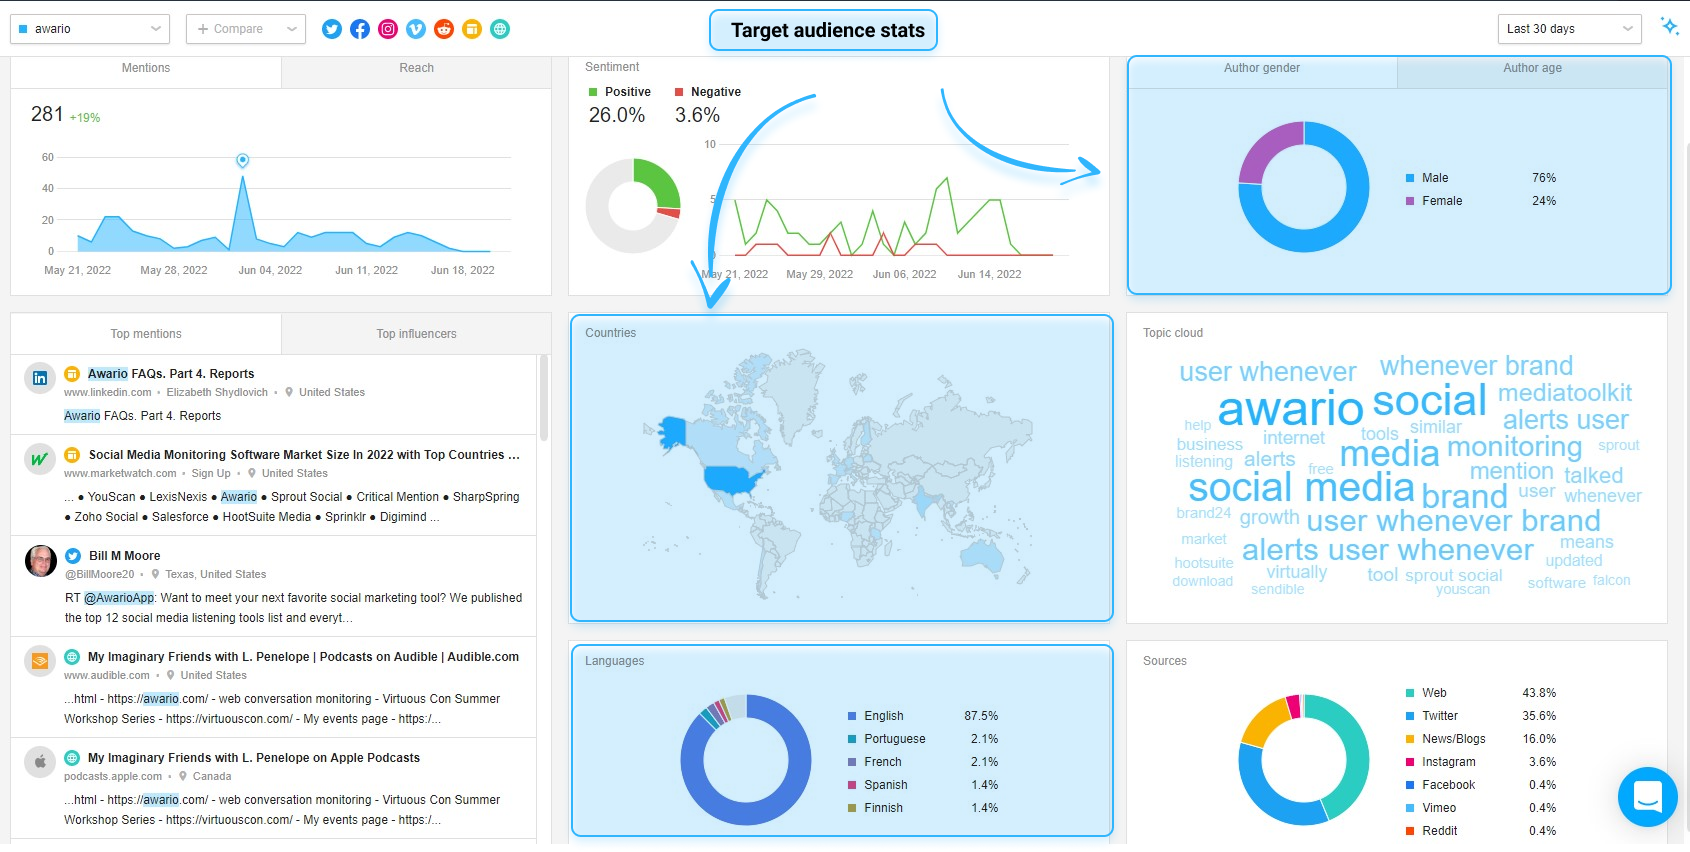 Awario Dashboard with target audience stats